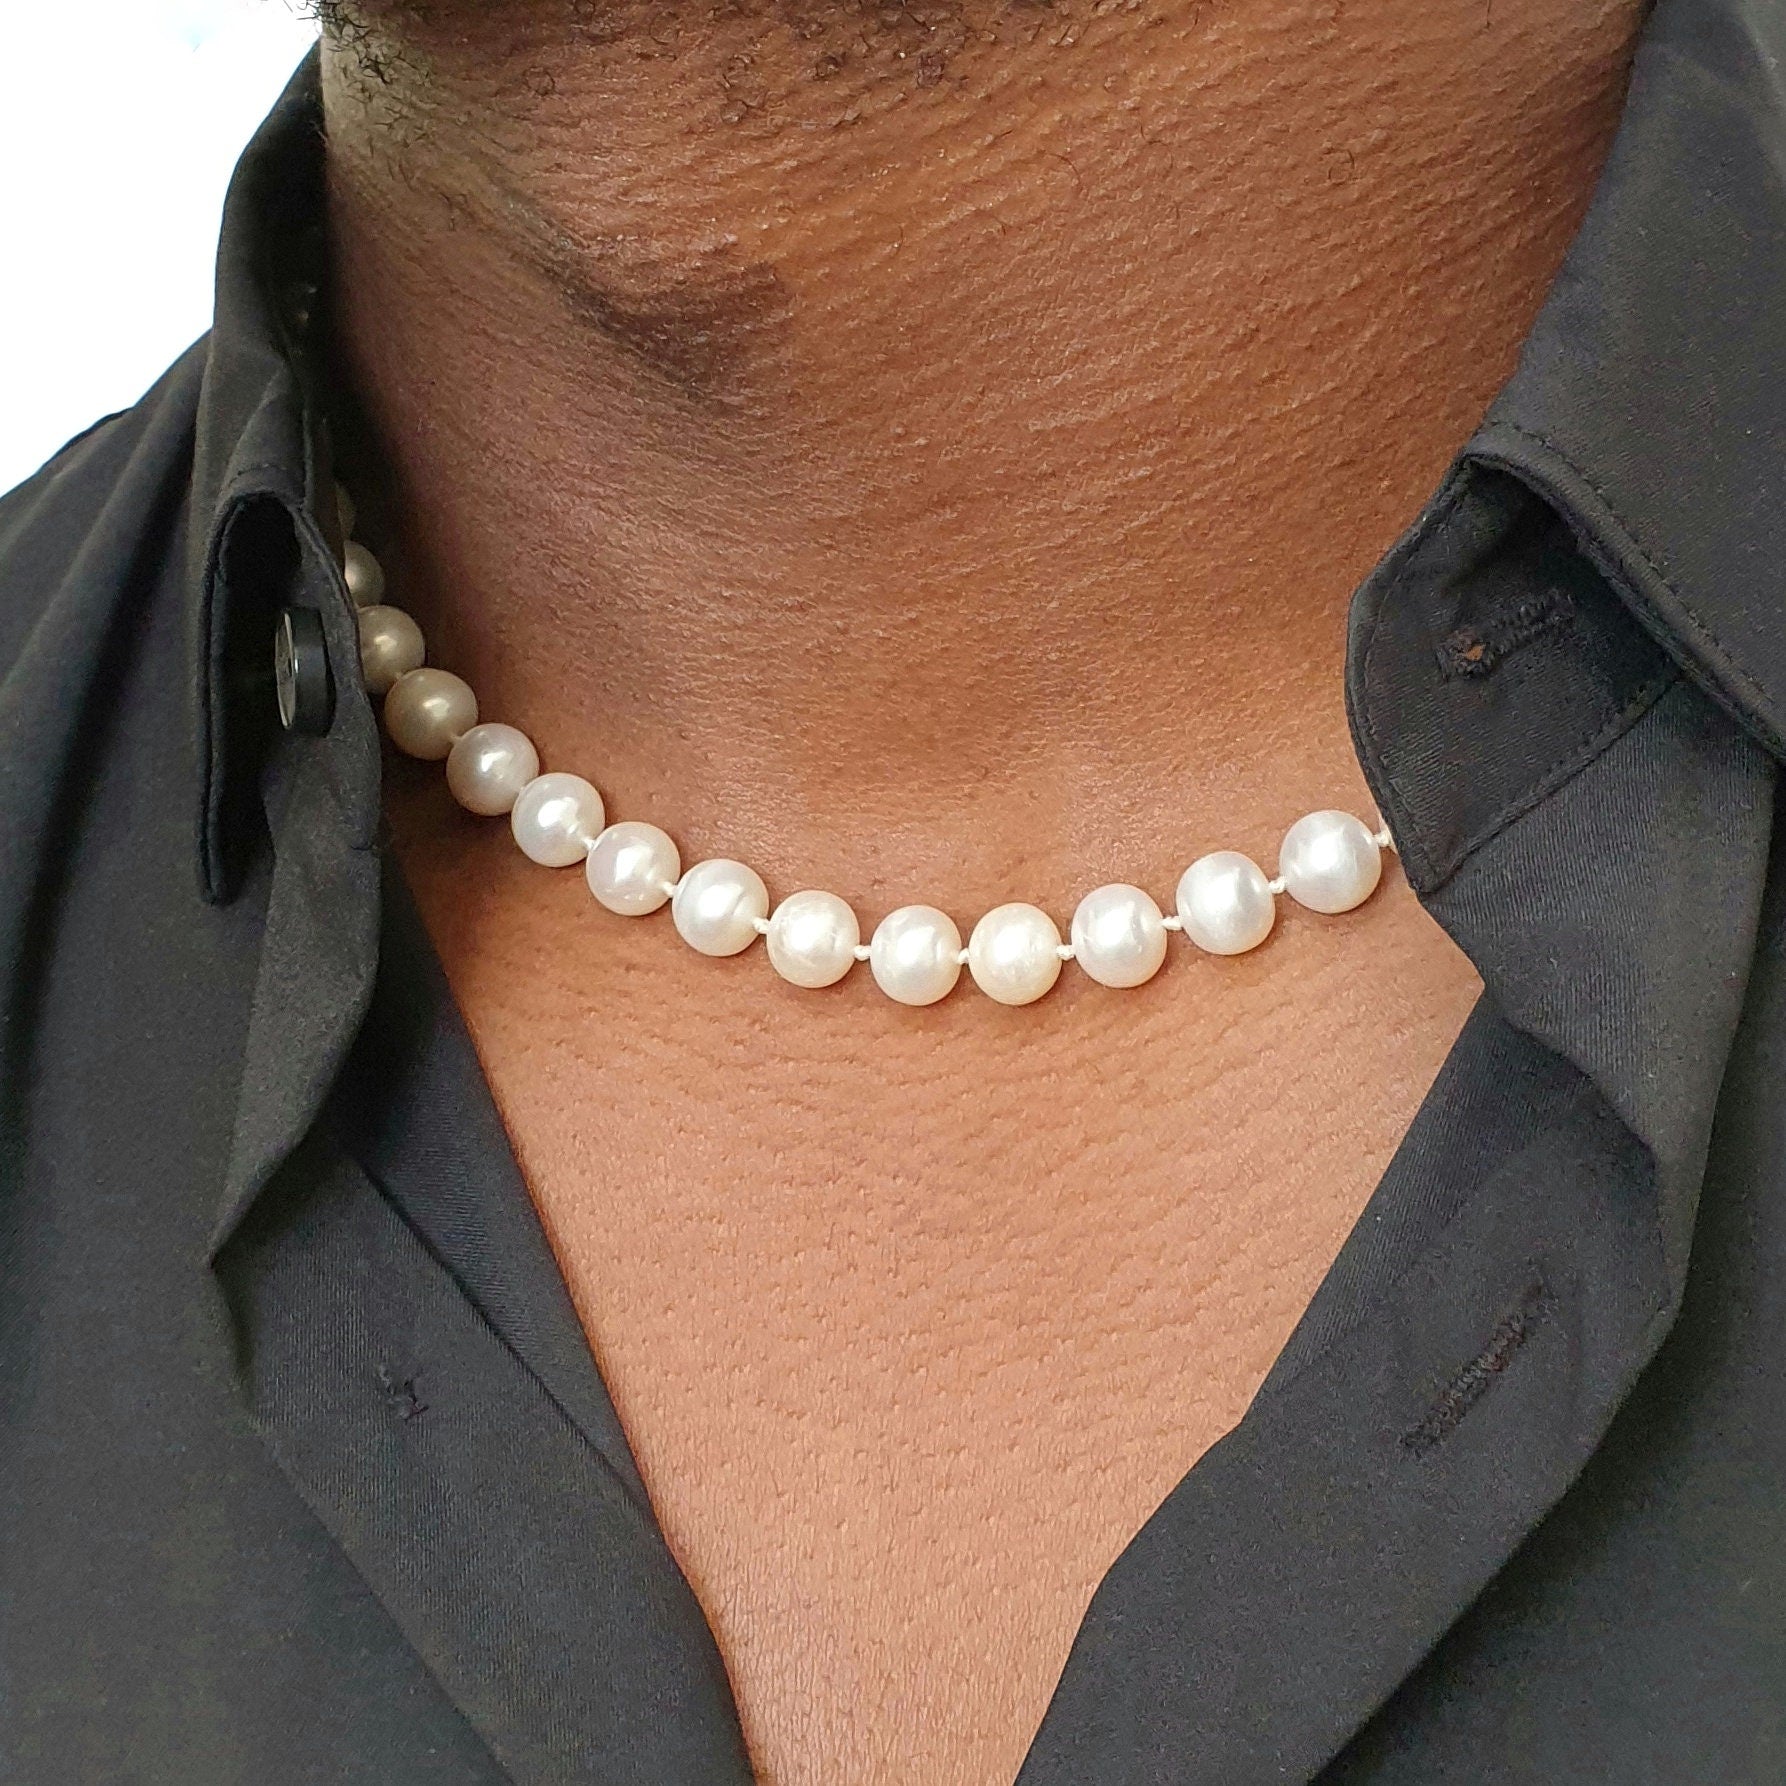 Buy Pearl Necklace for Men,White Pearl Necklace for Women,Round Pearl  Choker Necklace,Pearl Jewelry, bead, bead, at Amazon.in